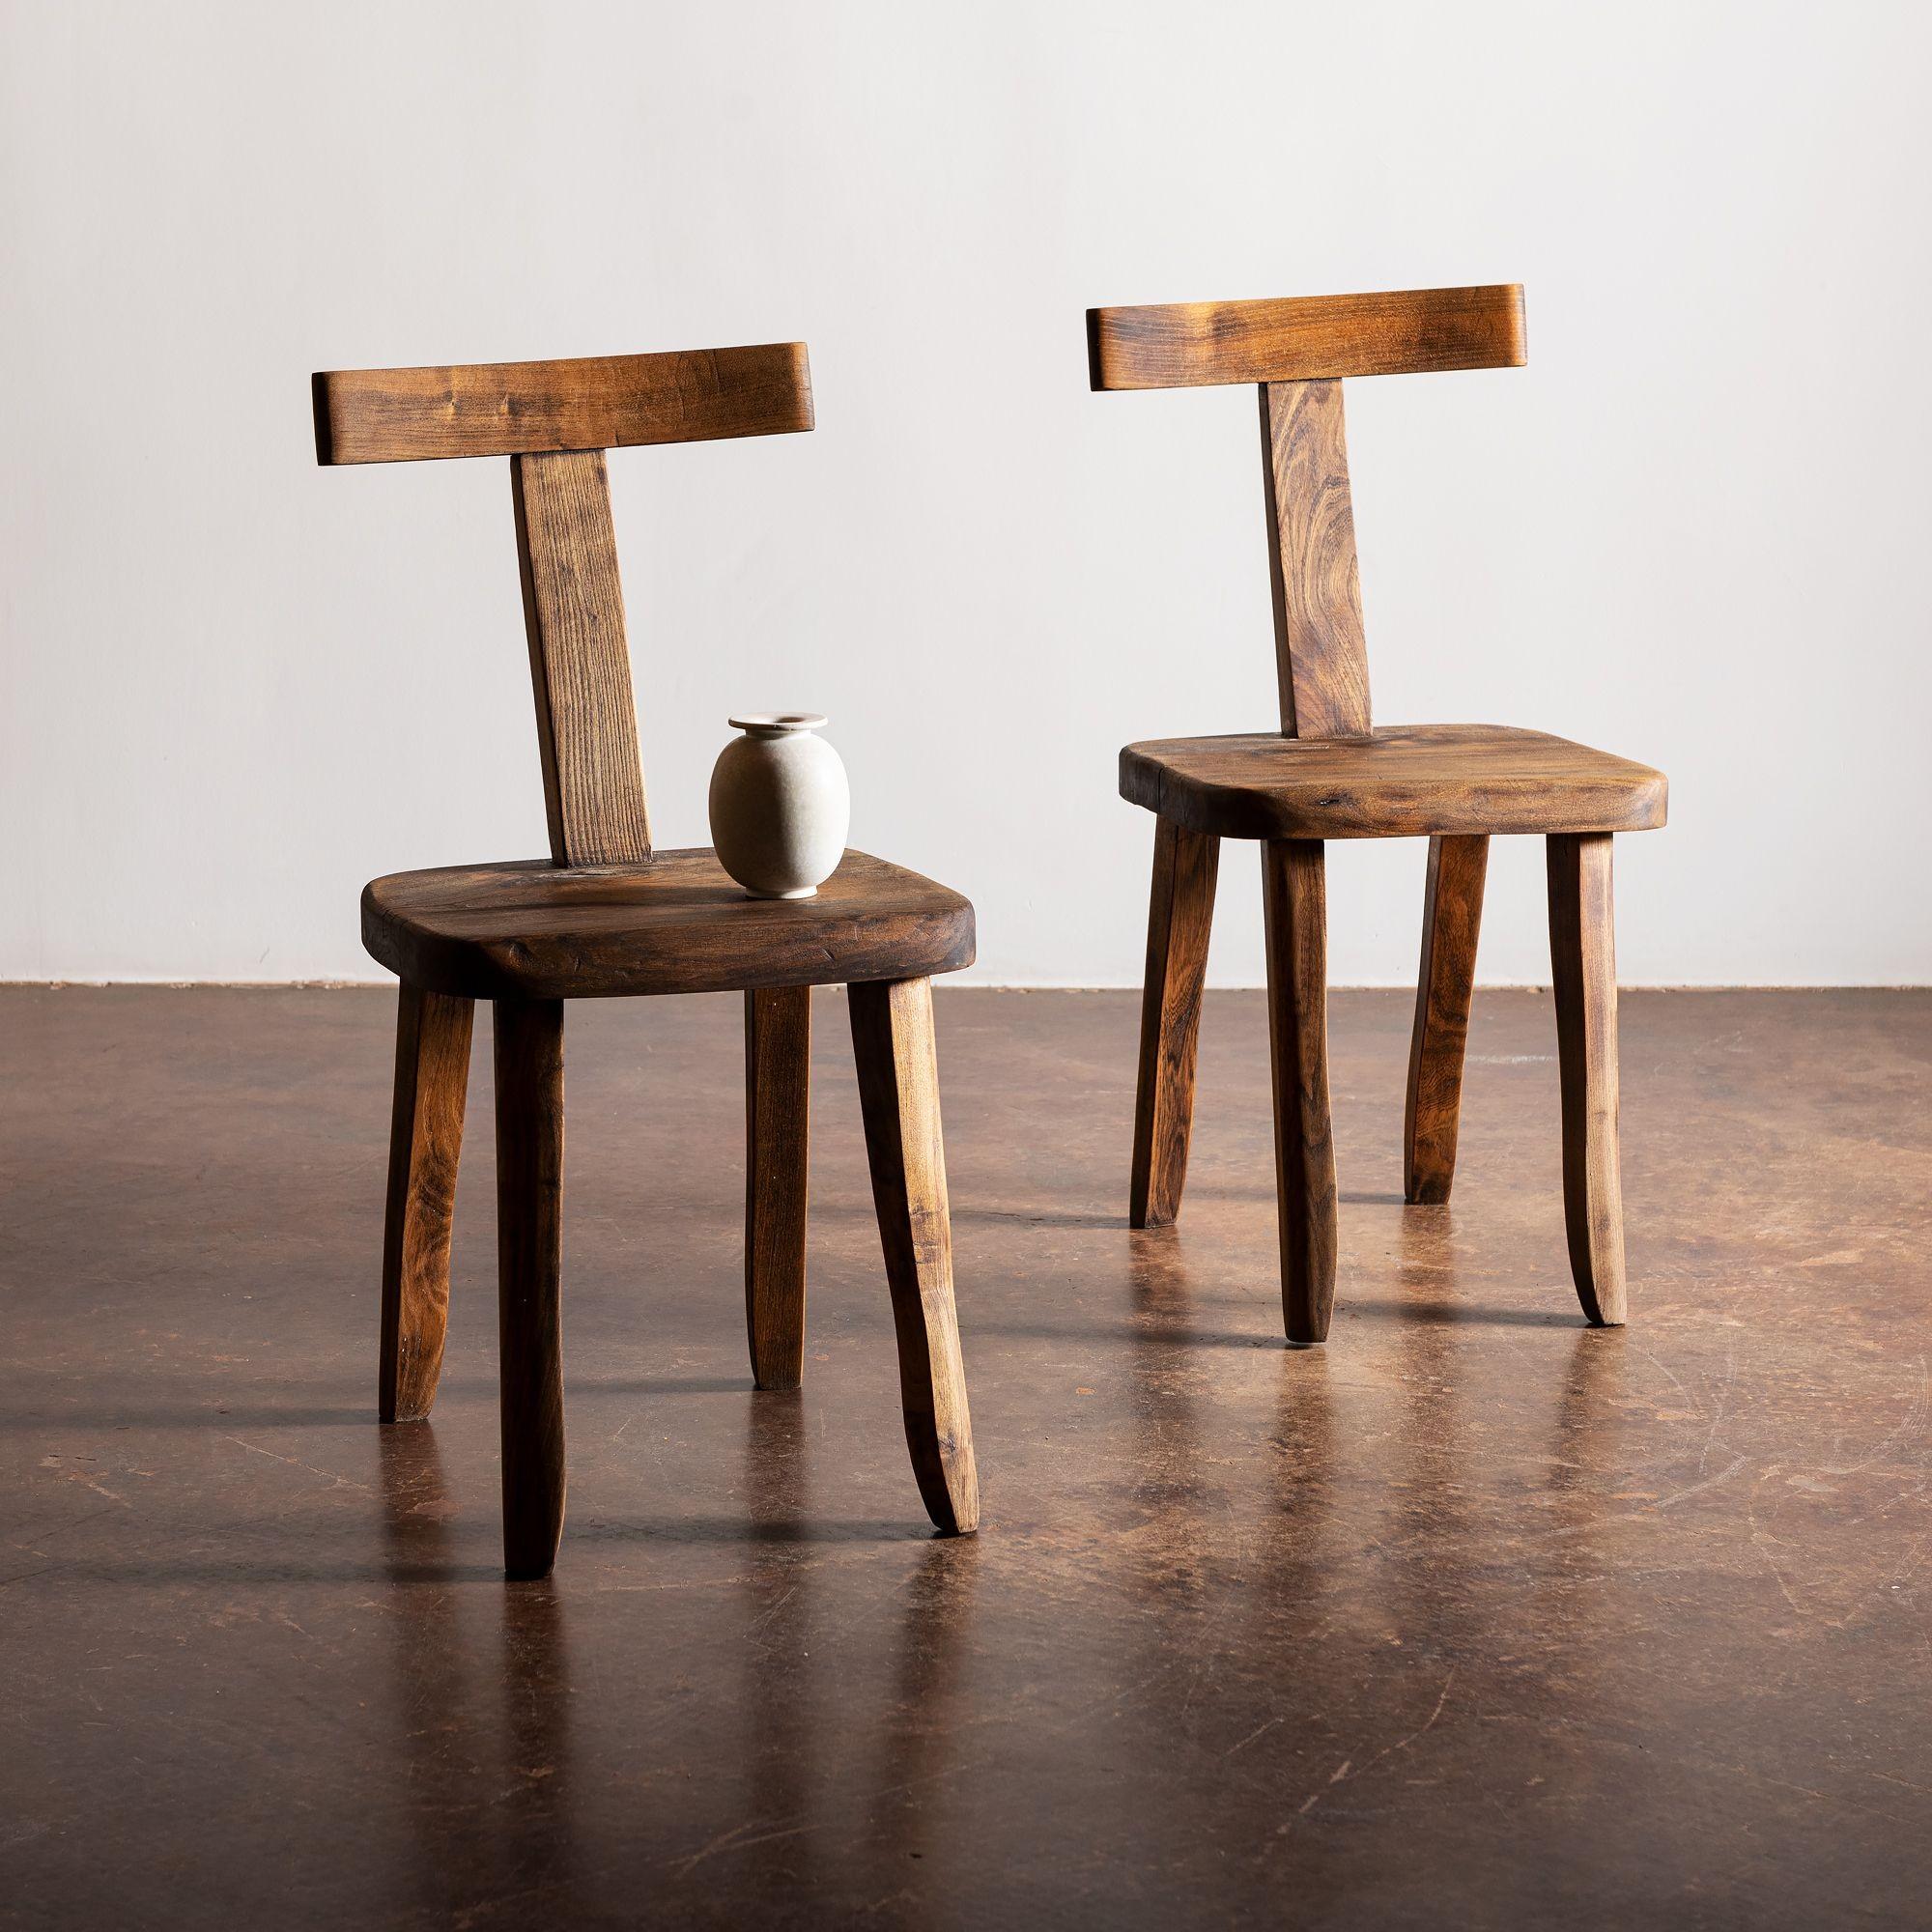 A lovely pair of minimalist chairs by Olavi Hanninen hand-crafted in solid elm. Finland, 1950s